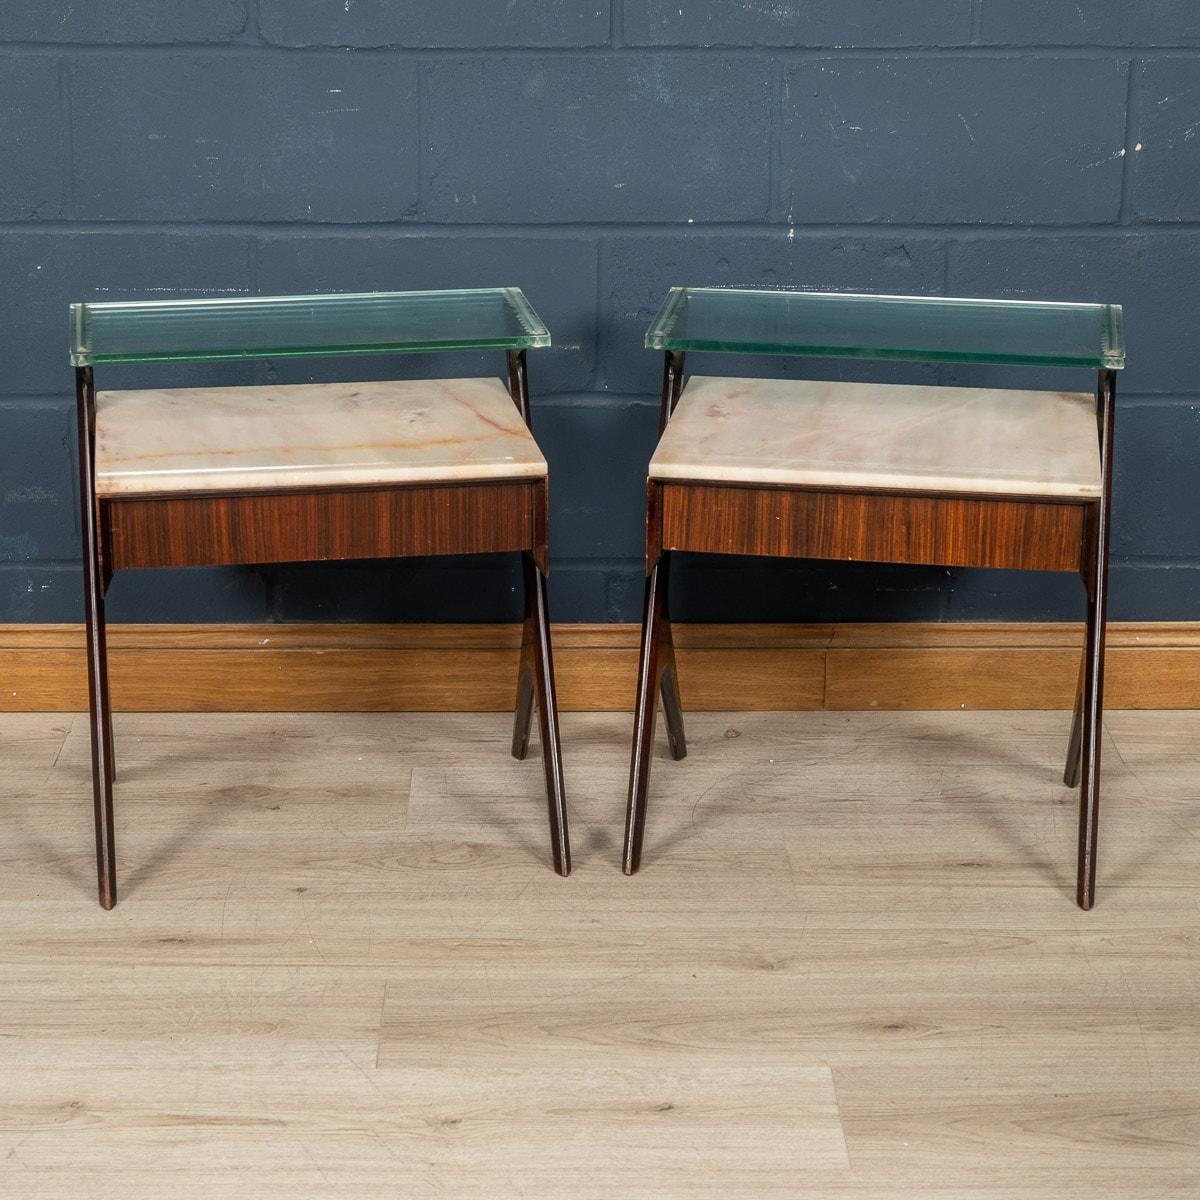 A very elegant pair of side tables designed by Vittorio, Alessandro and Plinio Dassi and produced in Lissone by Dassi, made in Italy in the middle of the 20th century. These wonderful side tables have executed in rosewood veneer and birch wood. The